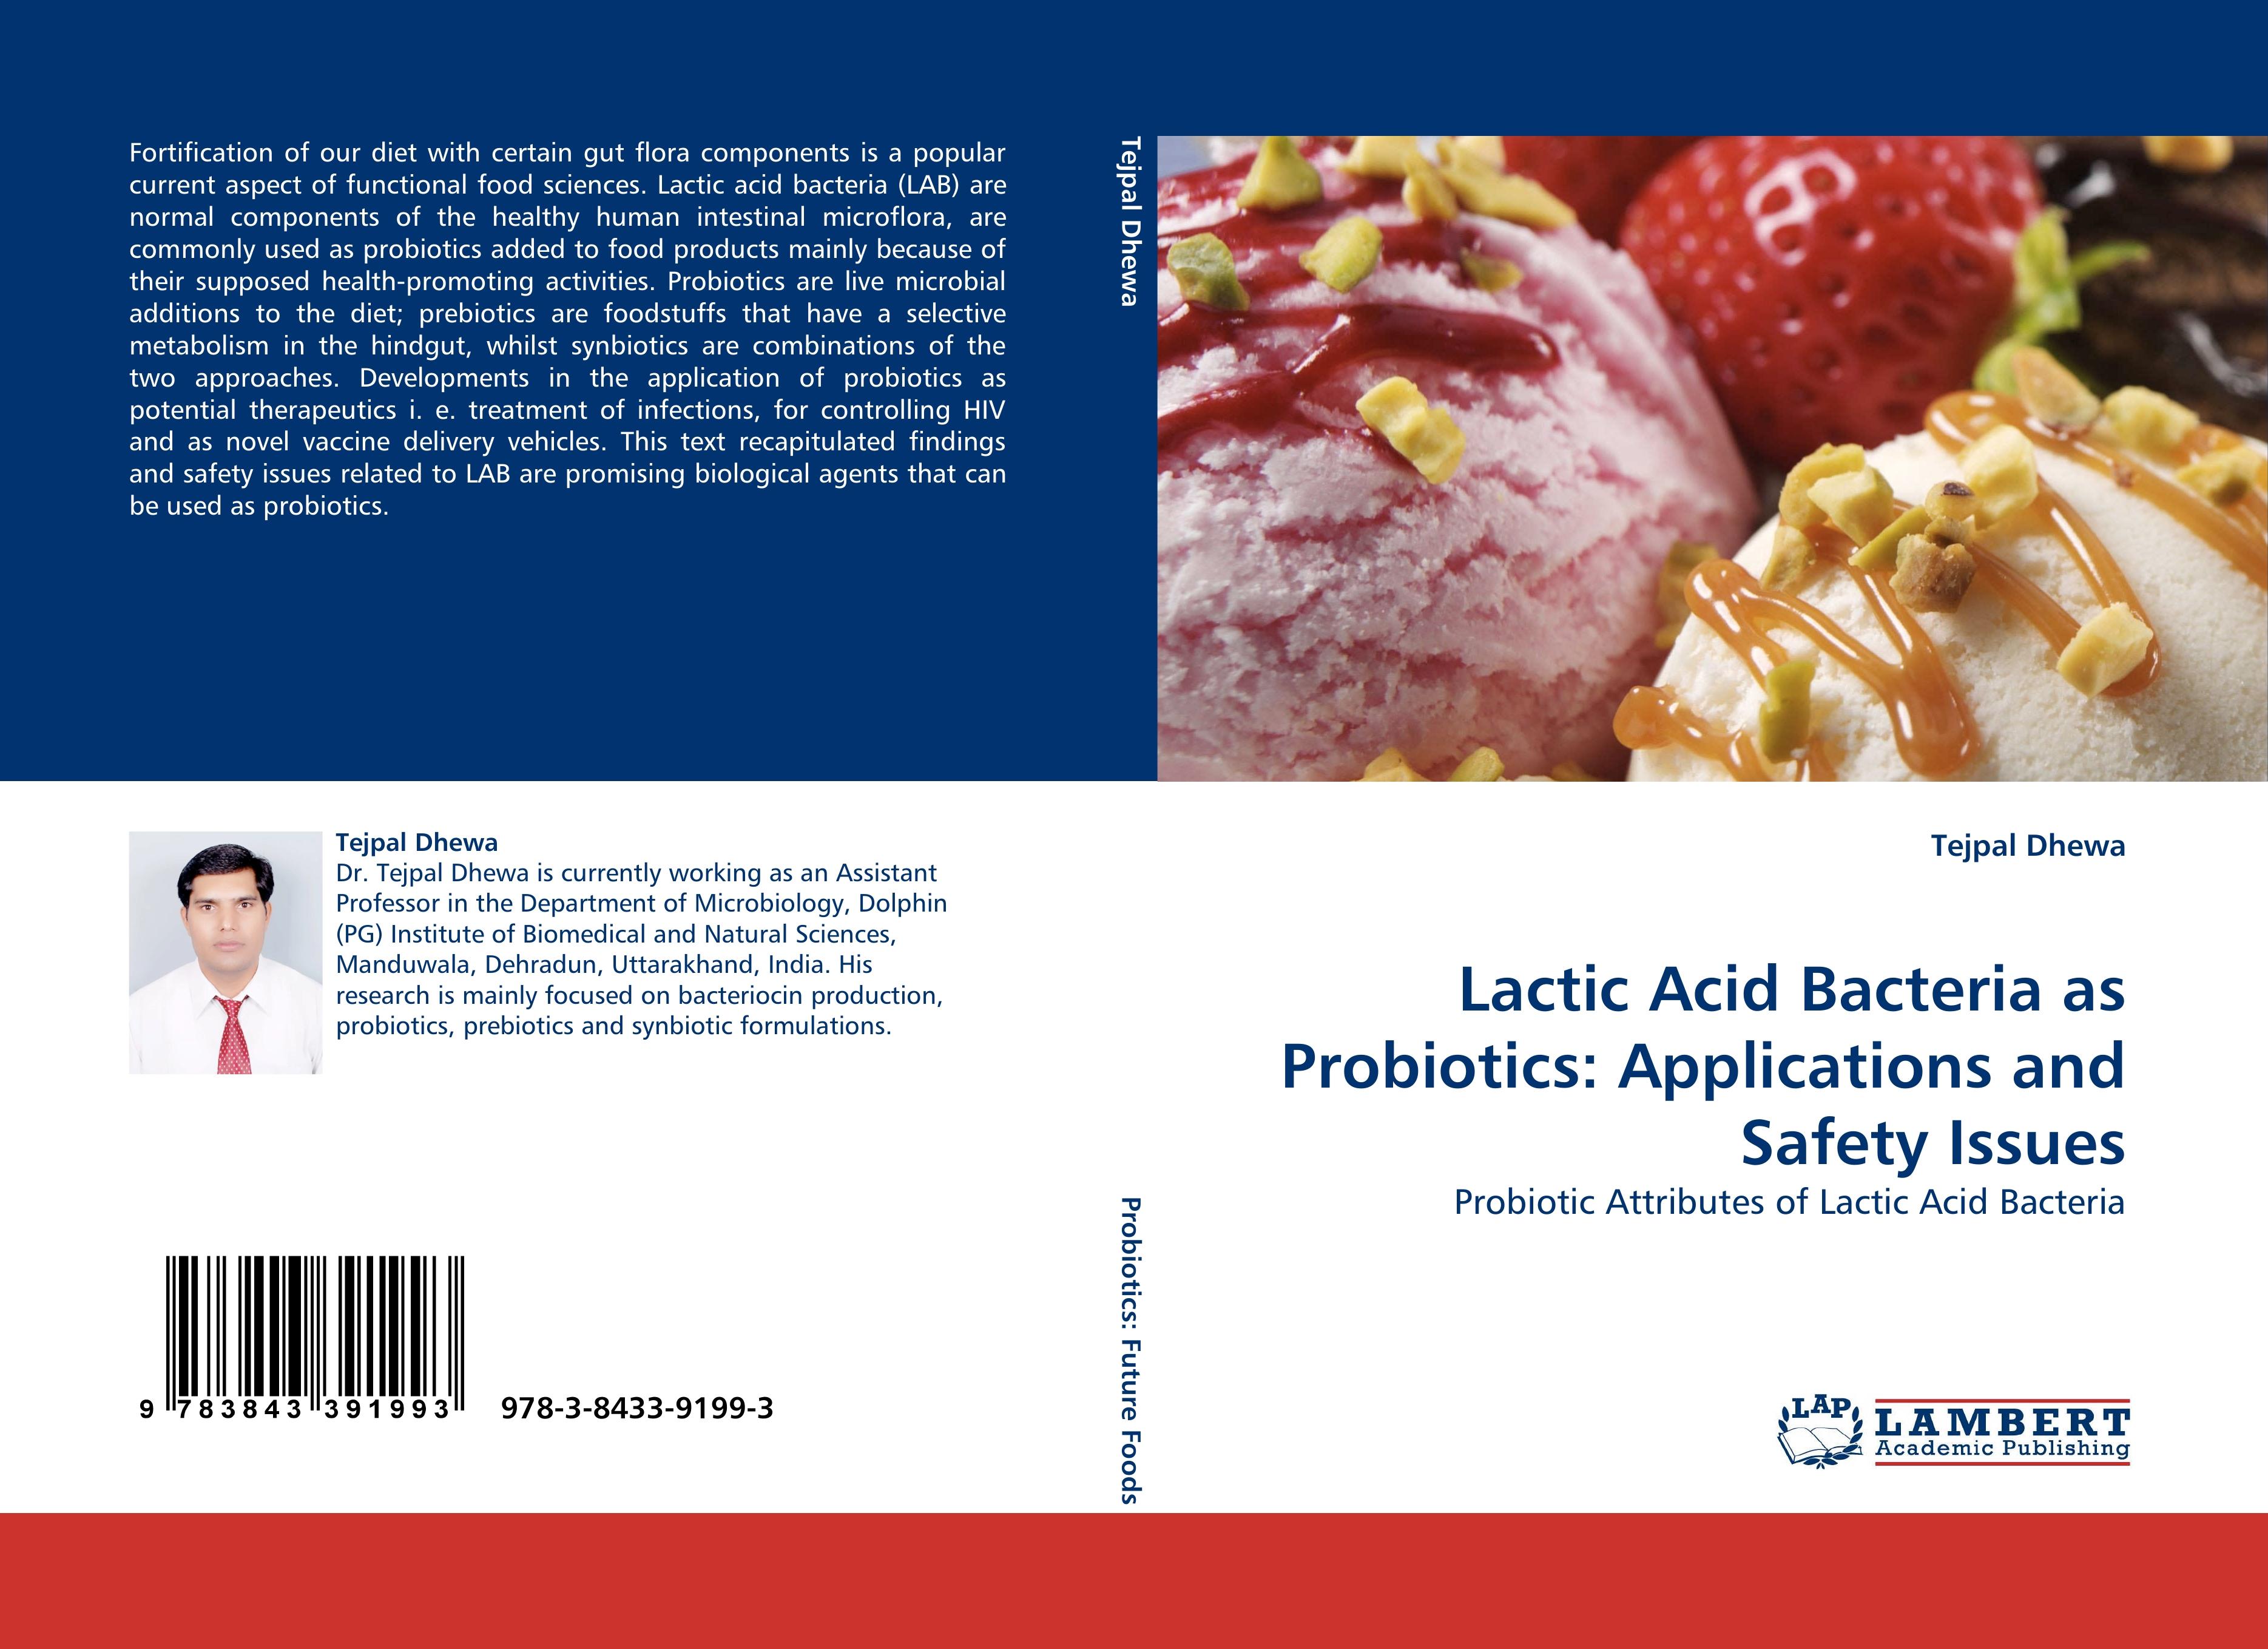 Lactic Acid Bacteria as Probiotics: Applications and Safety Issues - Tejpal Dhewa